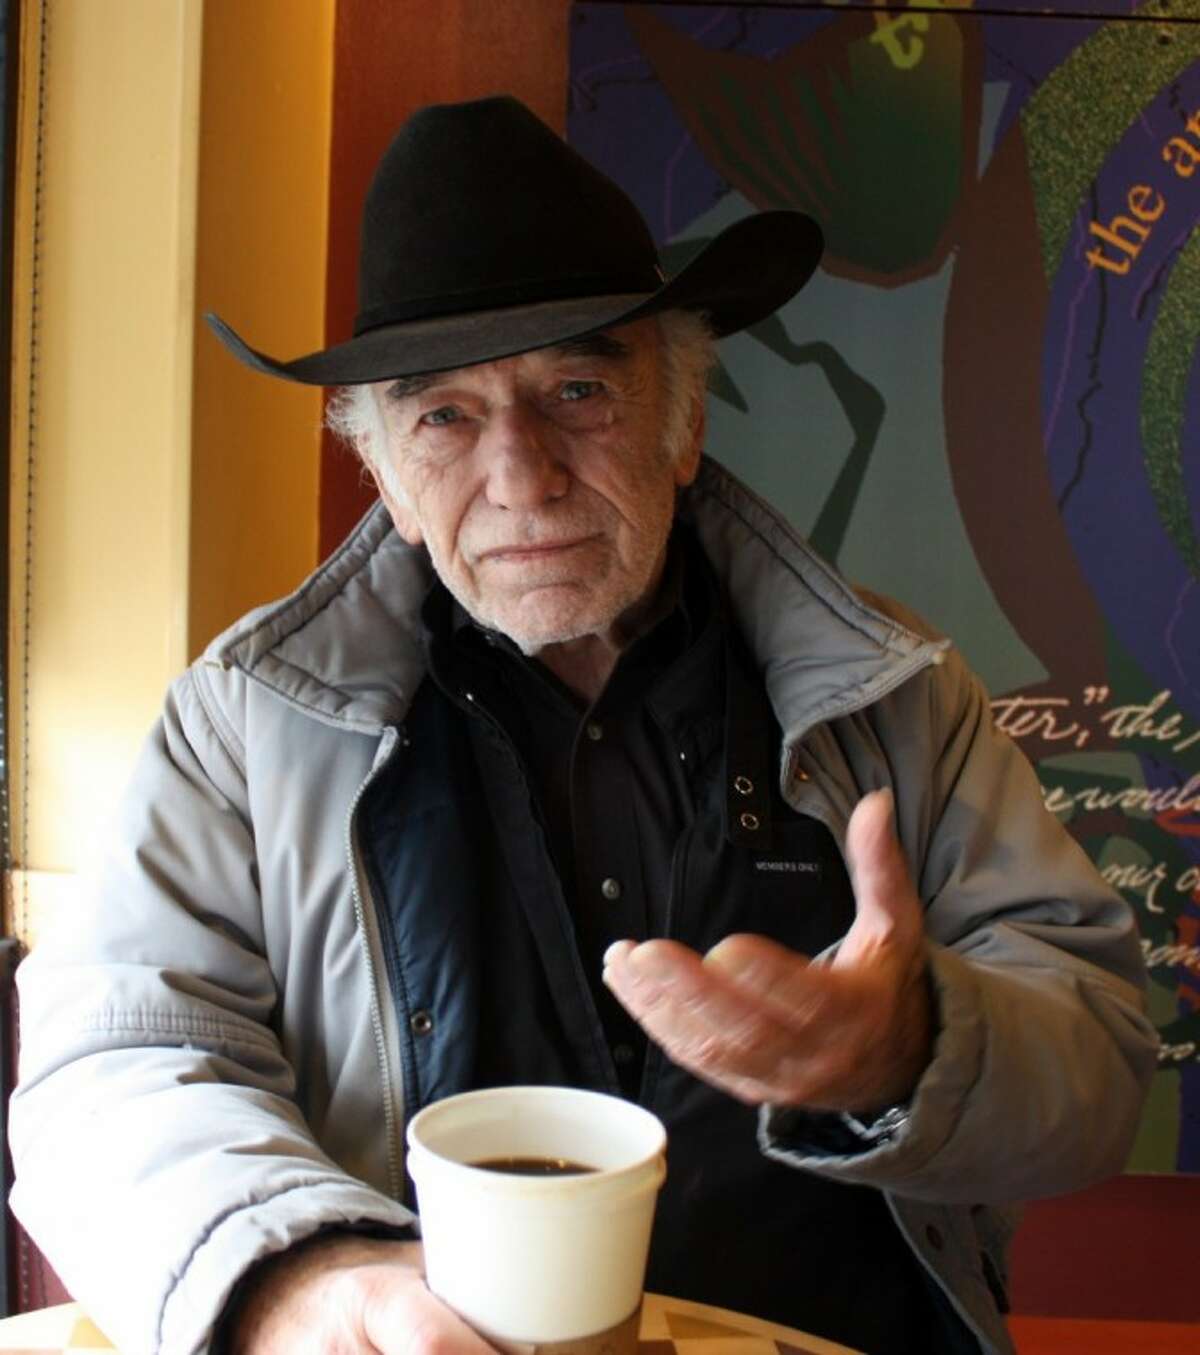 Actor James Drury enjoys a cup of coffee and conversation recently on a rainy day in Houston. Drury is marking the 50th anniversary of his long-running television show, The Virginian. “It was a great experience in my life. I never had a bad day at work,” he said.